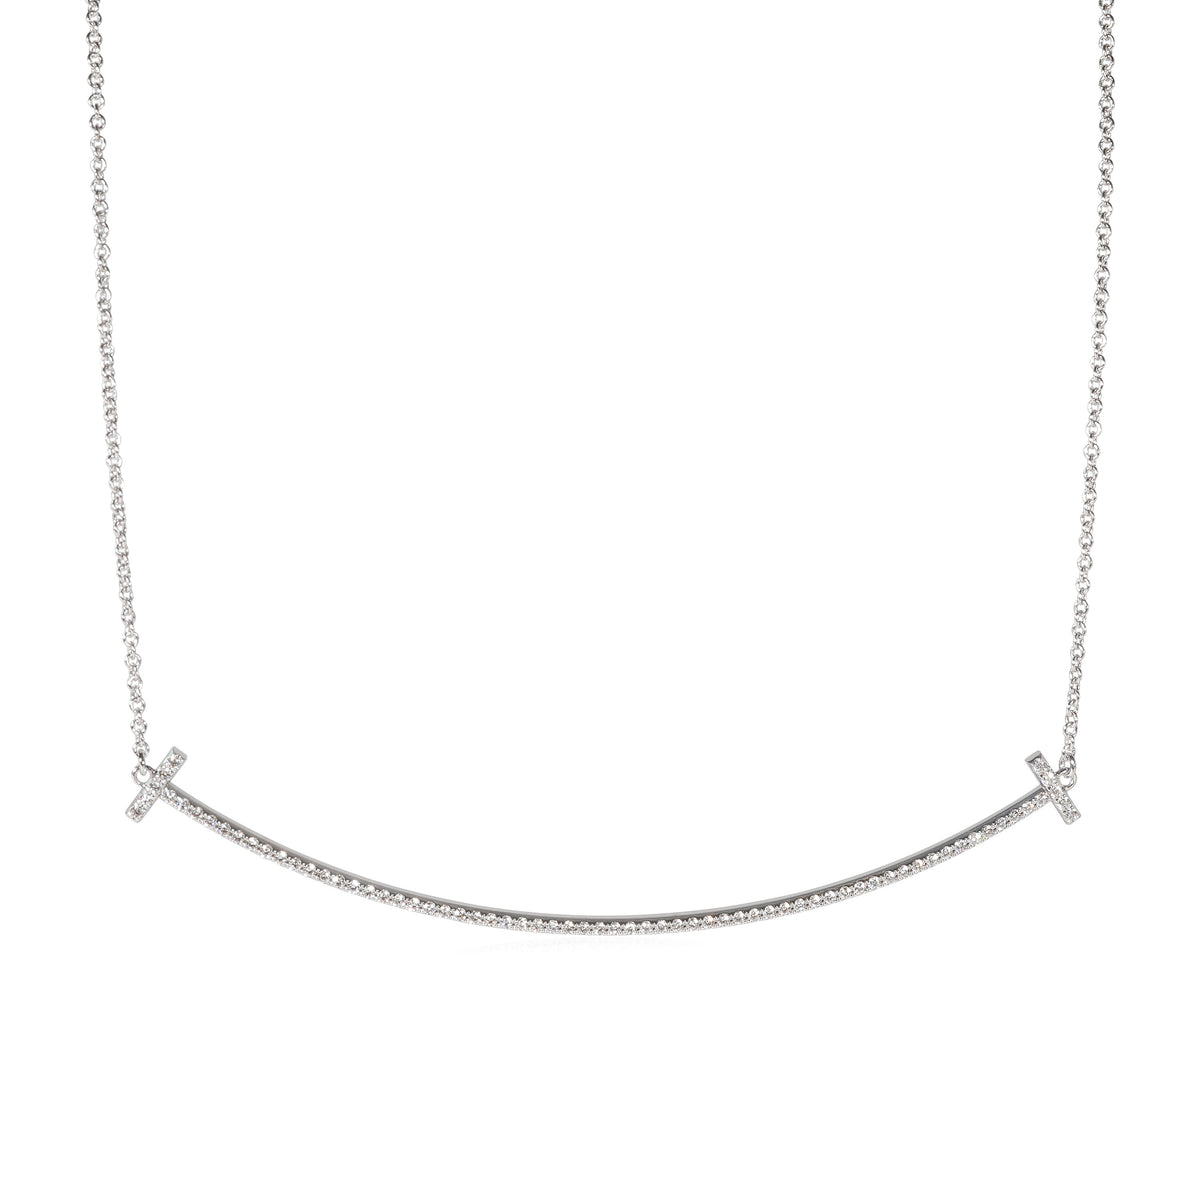 Tiffany & Co. T Smile Diamond Necklace in 18k White Gold 0.19 CTW